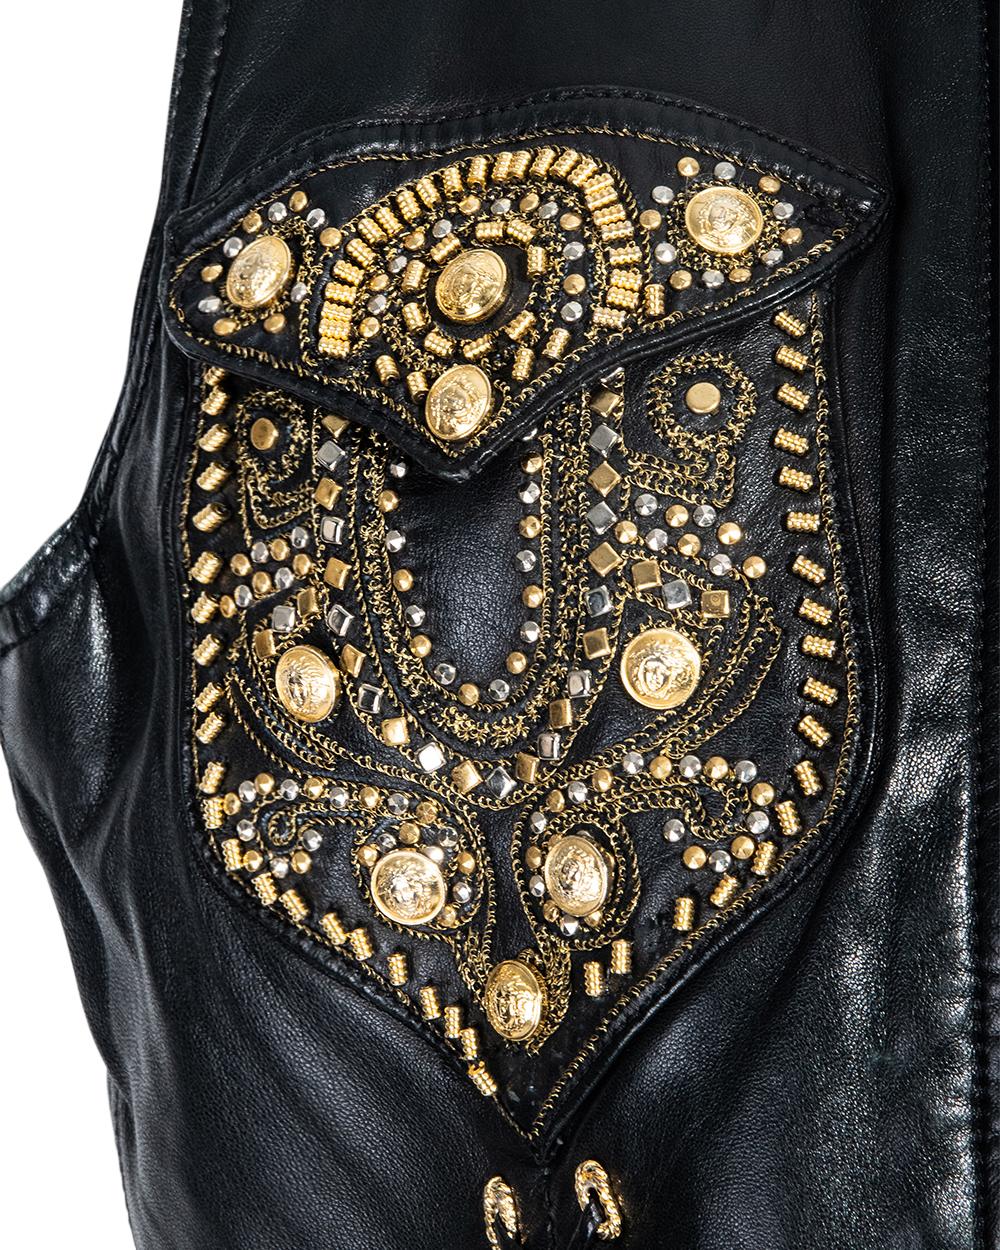 A/W 1992 Gianni Versace Leather Vest, Pant and Belt Set with Gold Stud Details 11